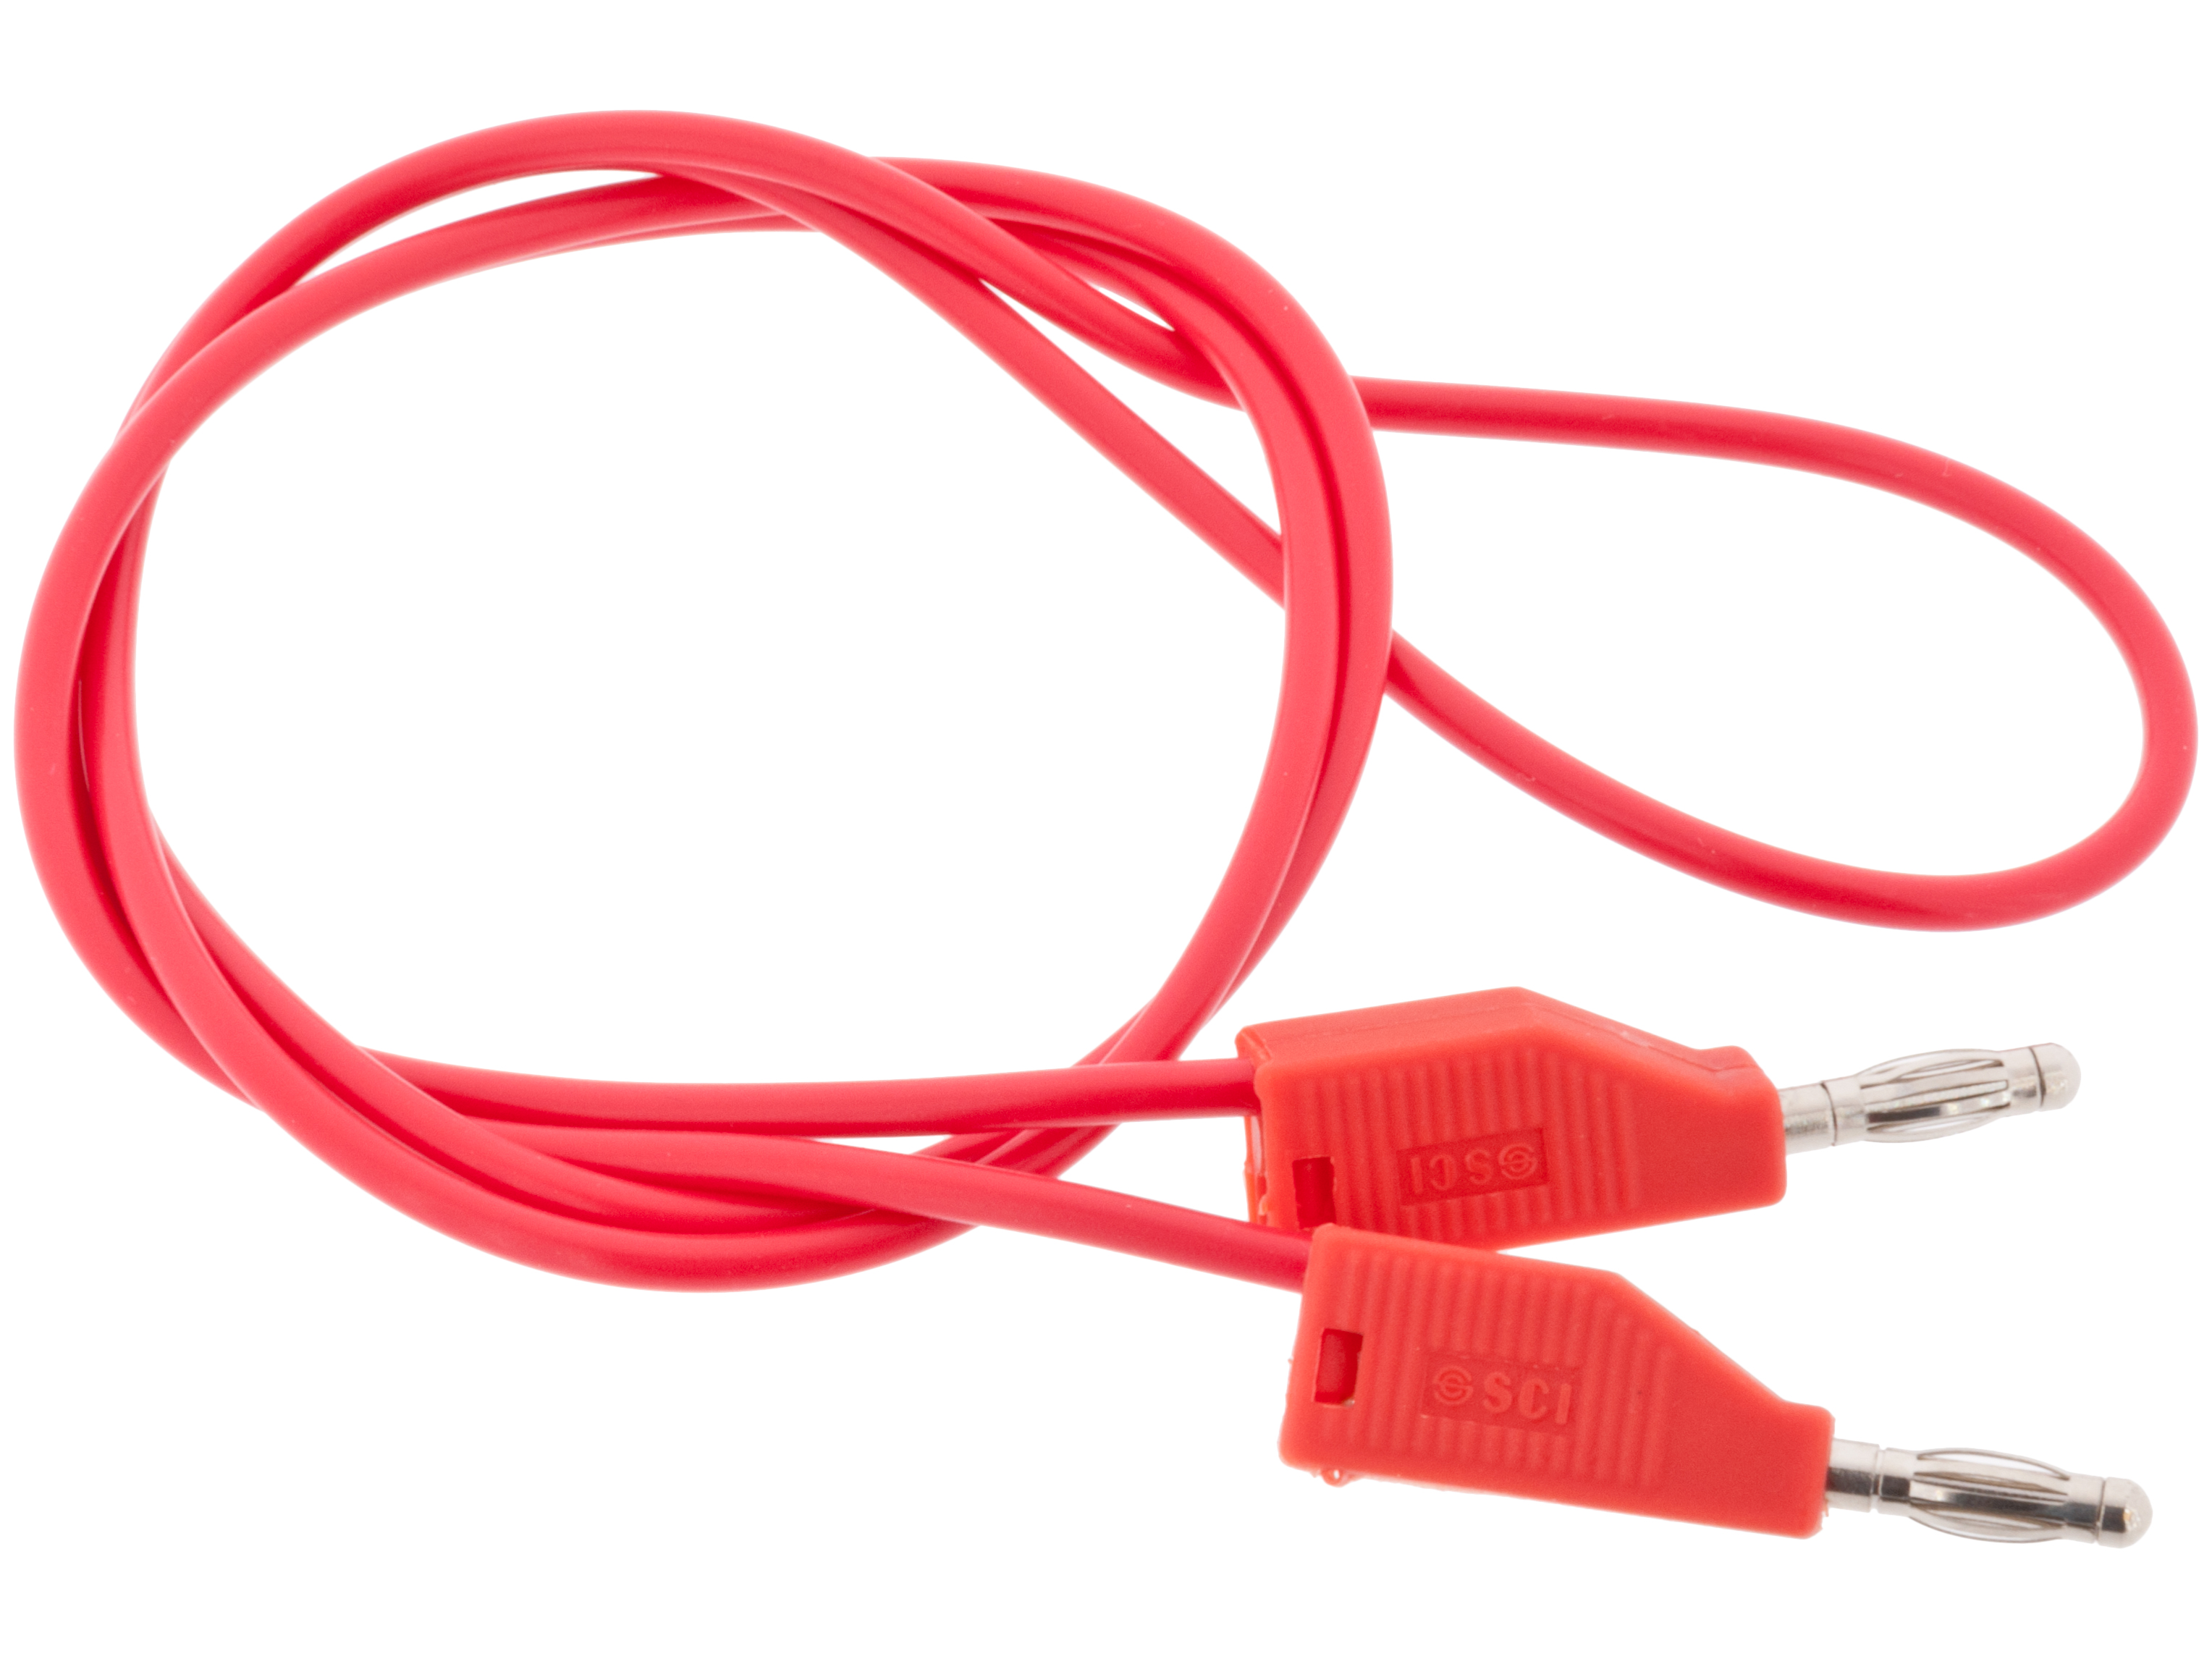 BANANA Cable Red 1M